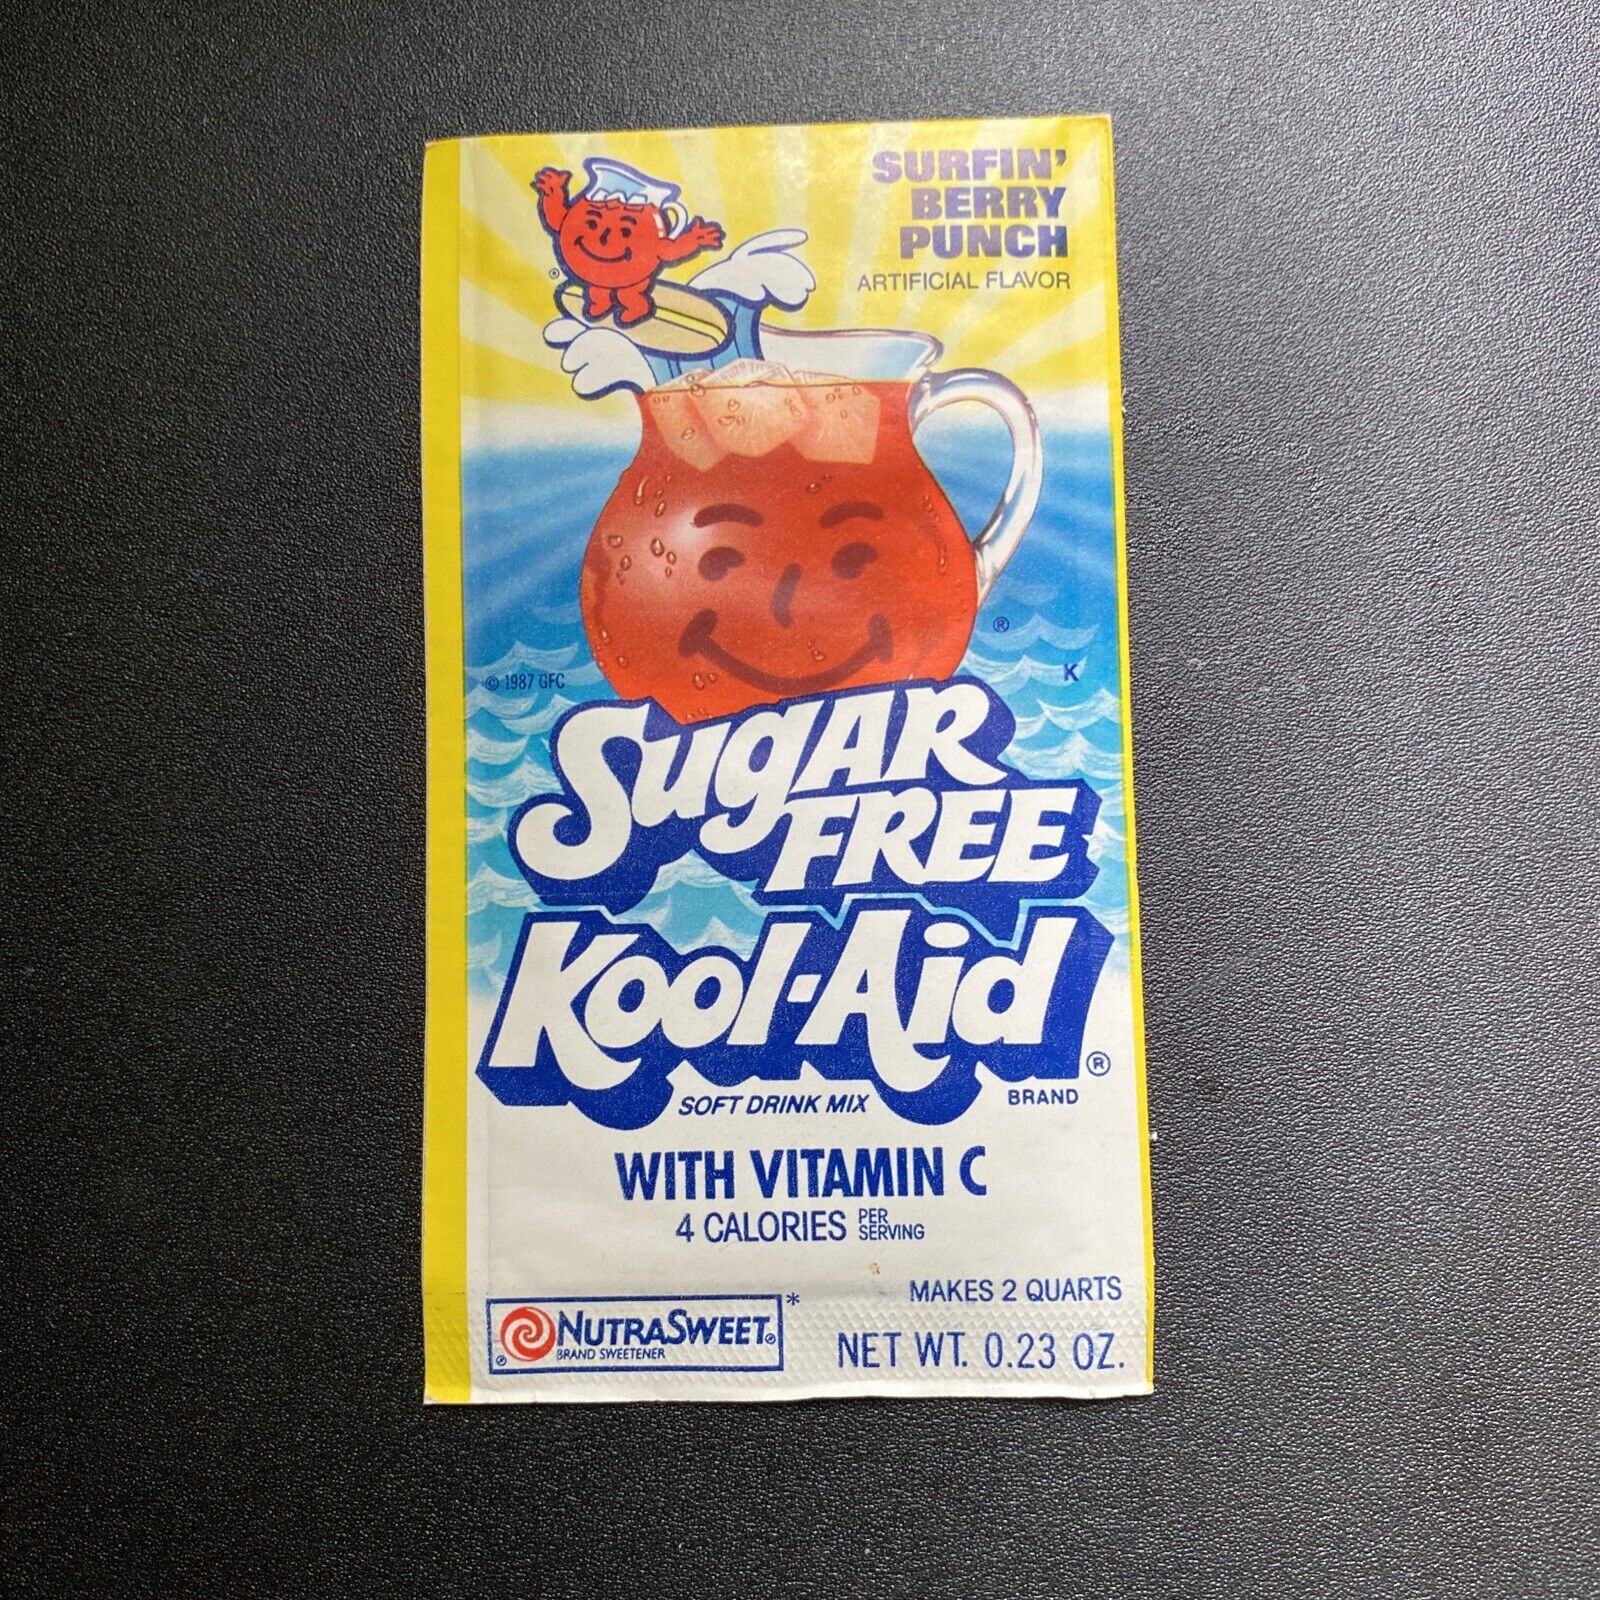 Extremely Rare Surfin Berry Punch Sugar Free Kool Aid Pack Unopened